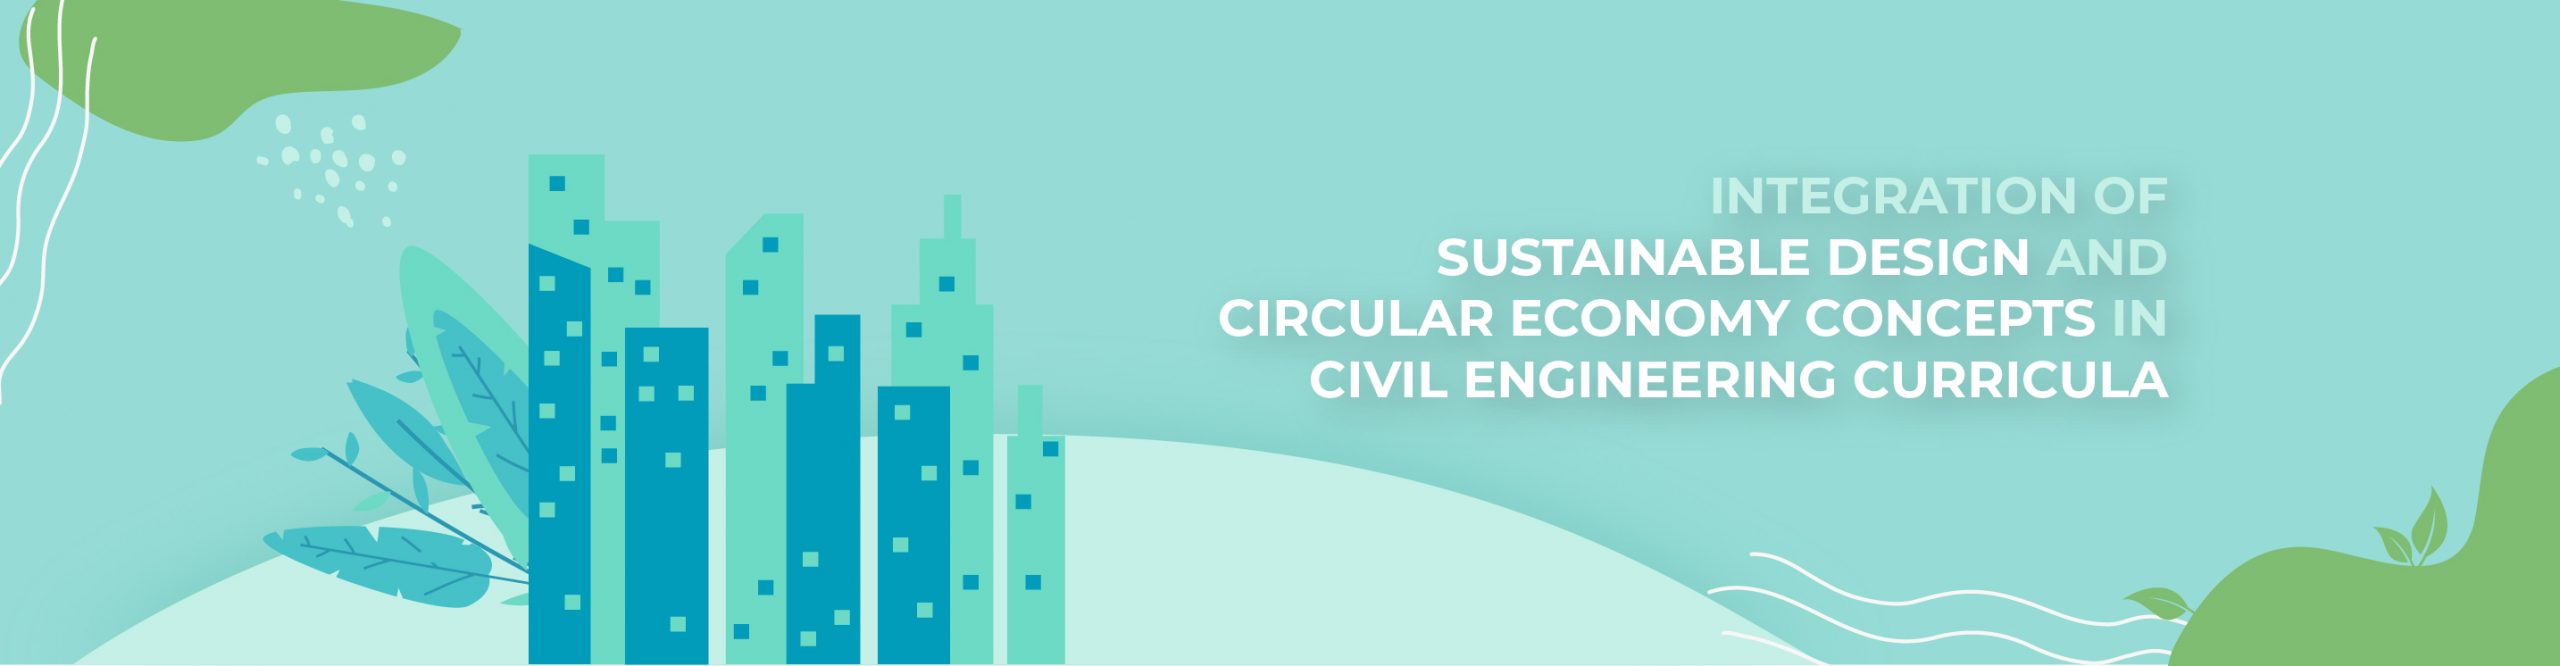 Integration of Sustainable Design and Circular Economy Concepts in Civil Engineering Curricula (SUSTAIN – CE)